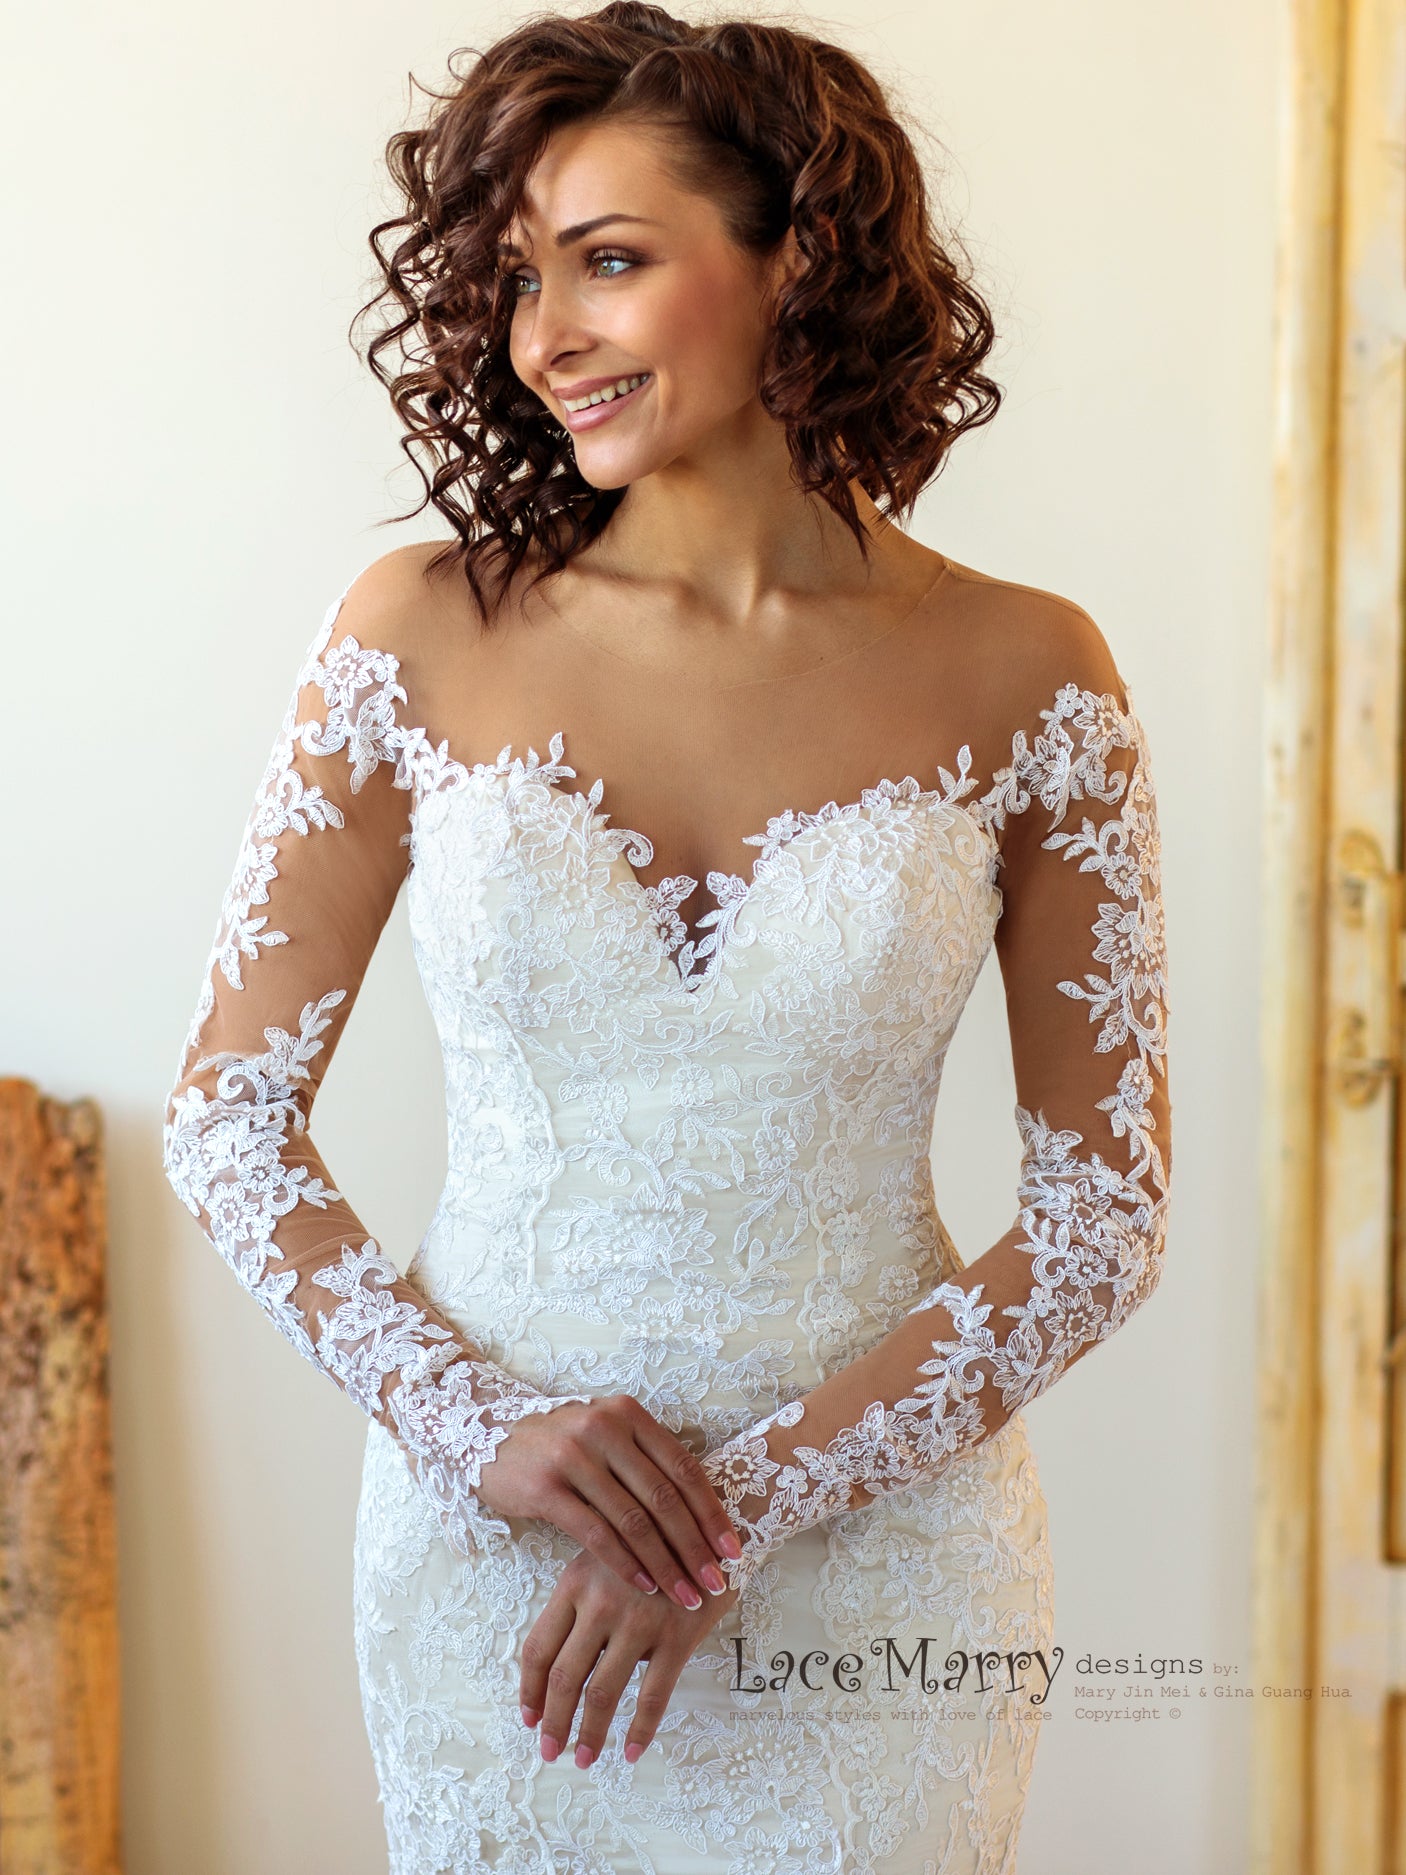 https://cdn.shopify.com/s/files/1/0205/9166/products/LACEMARRY_WEDDING_DRESSES_-_WD191_-_00_-_02_1600x.jpg?v=1610730255